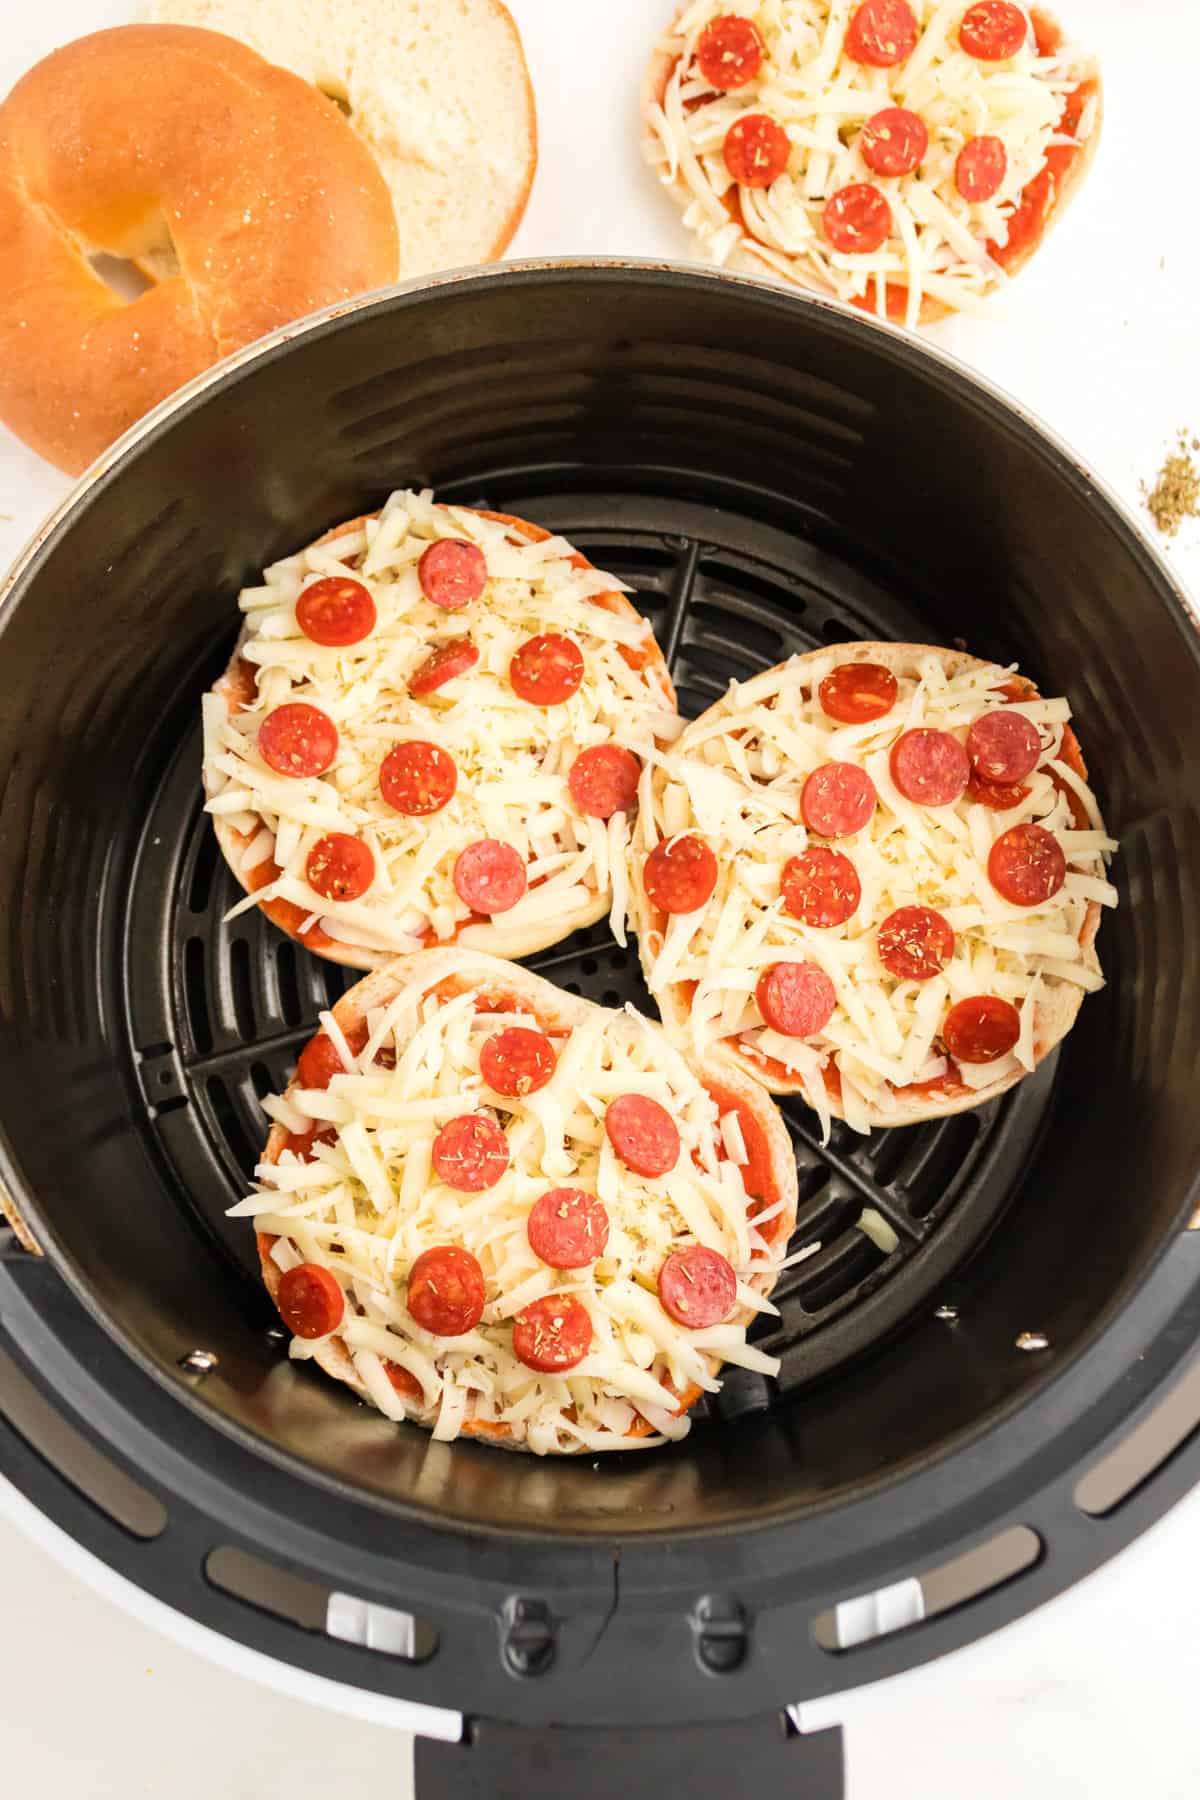 Three uncooked pizza bagels in the basket of an air fryer.